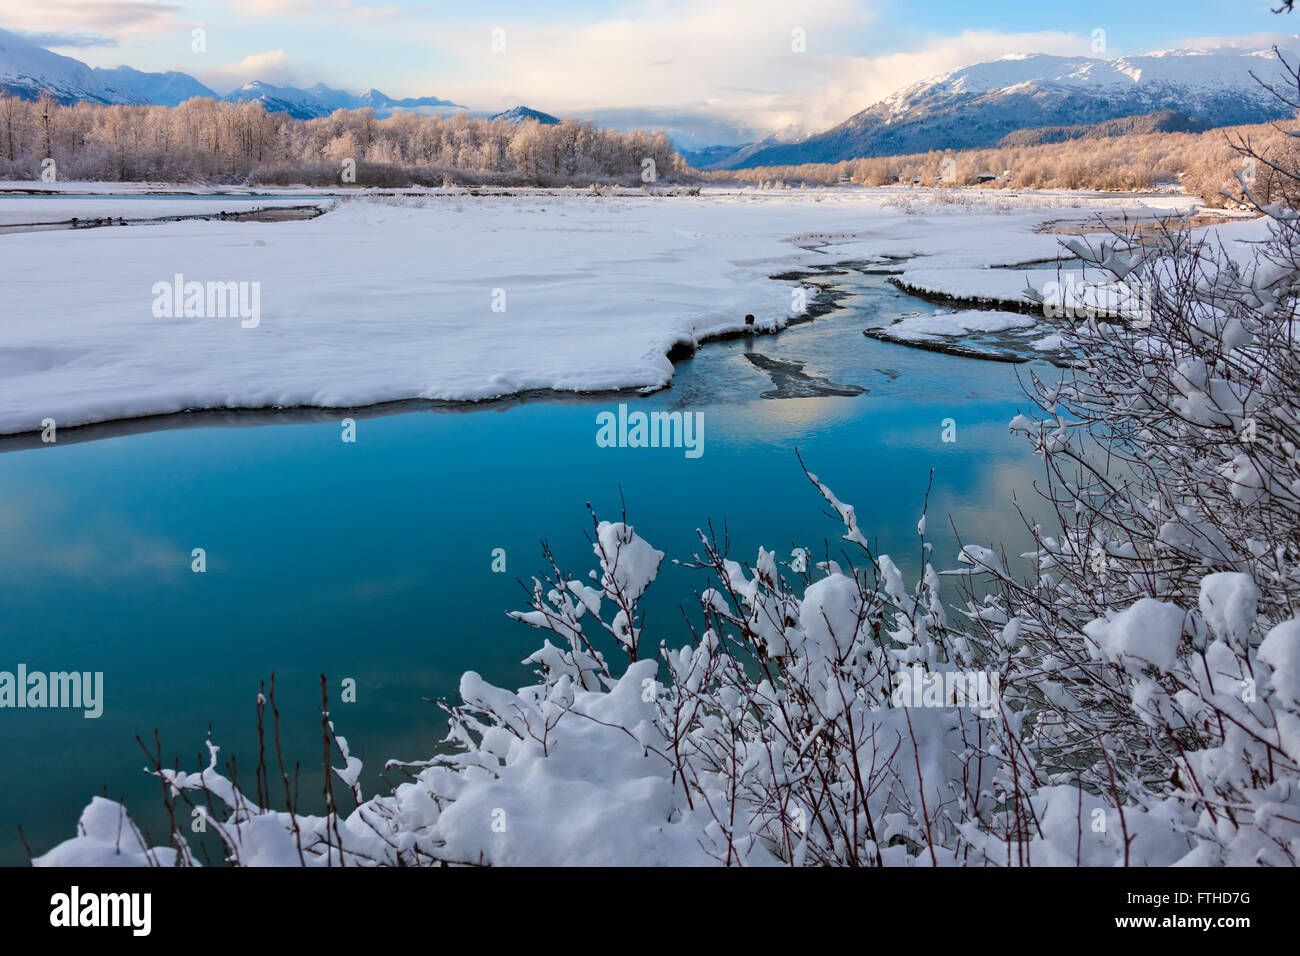 Landscape of river and forest covered with snow, Haines, Alaska, USA Stock Photo